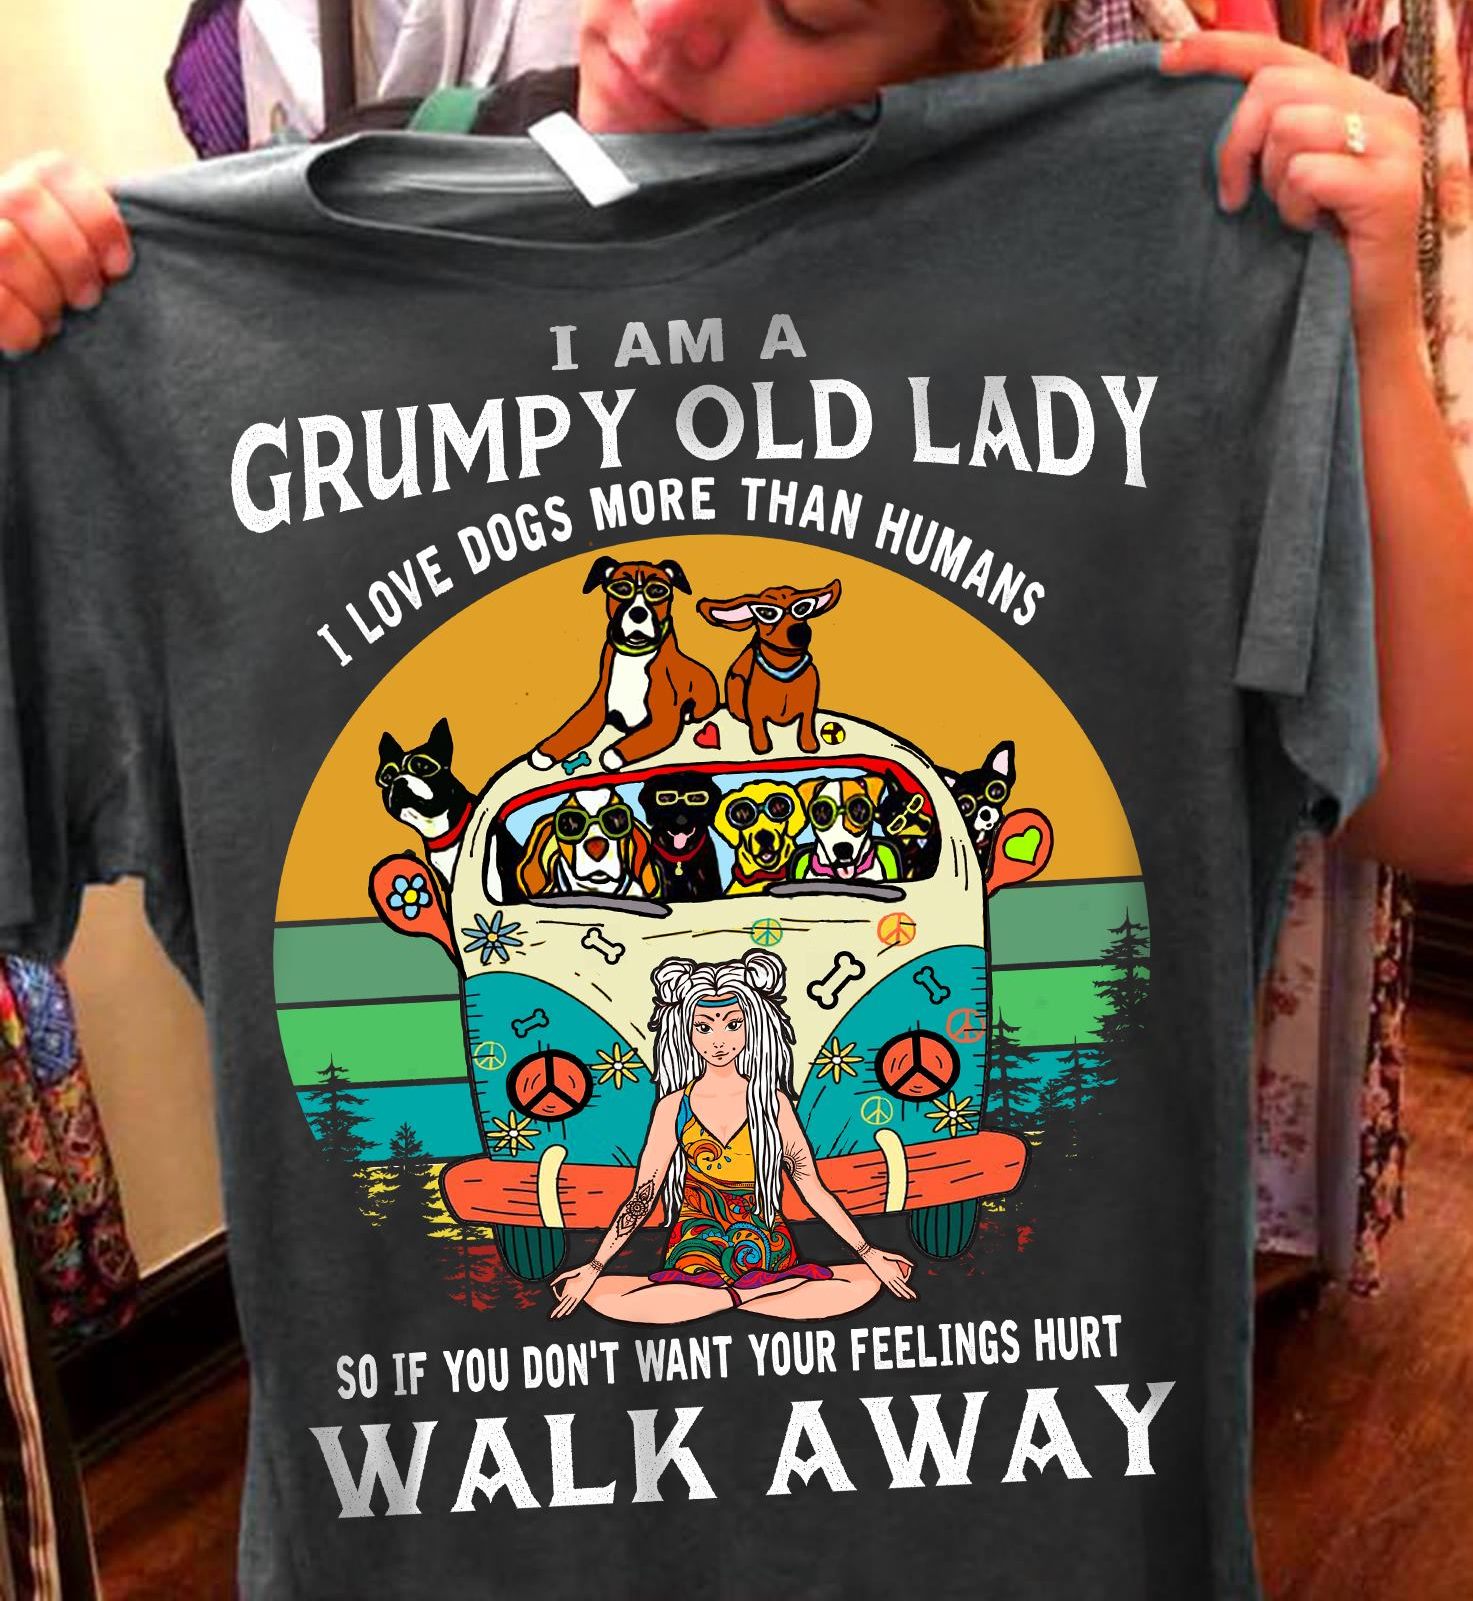 I am a grumpy old lady I love dogs more than humans - Car full of dogs, dog lover